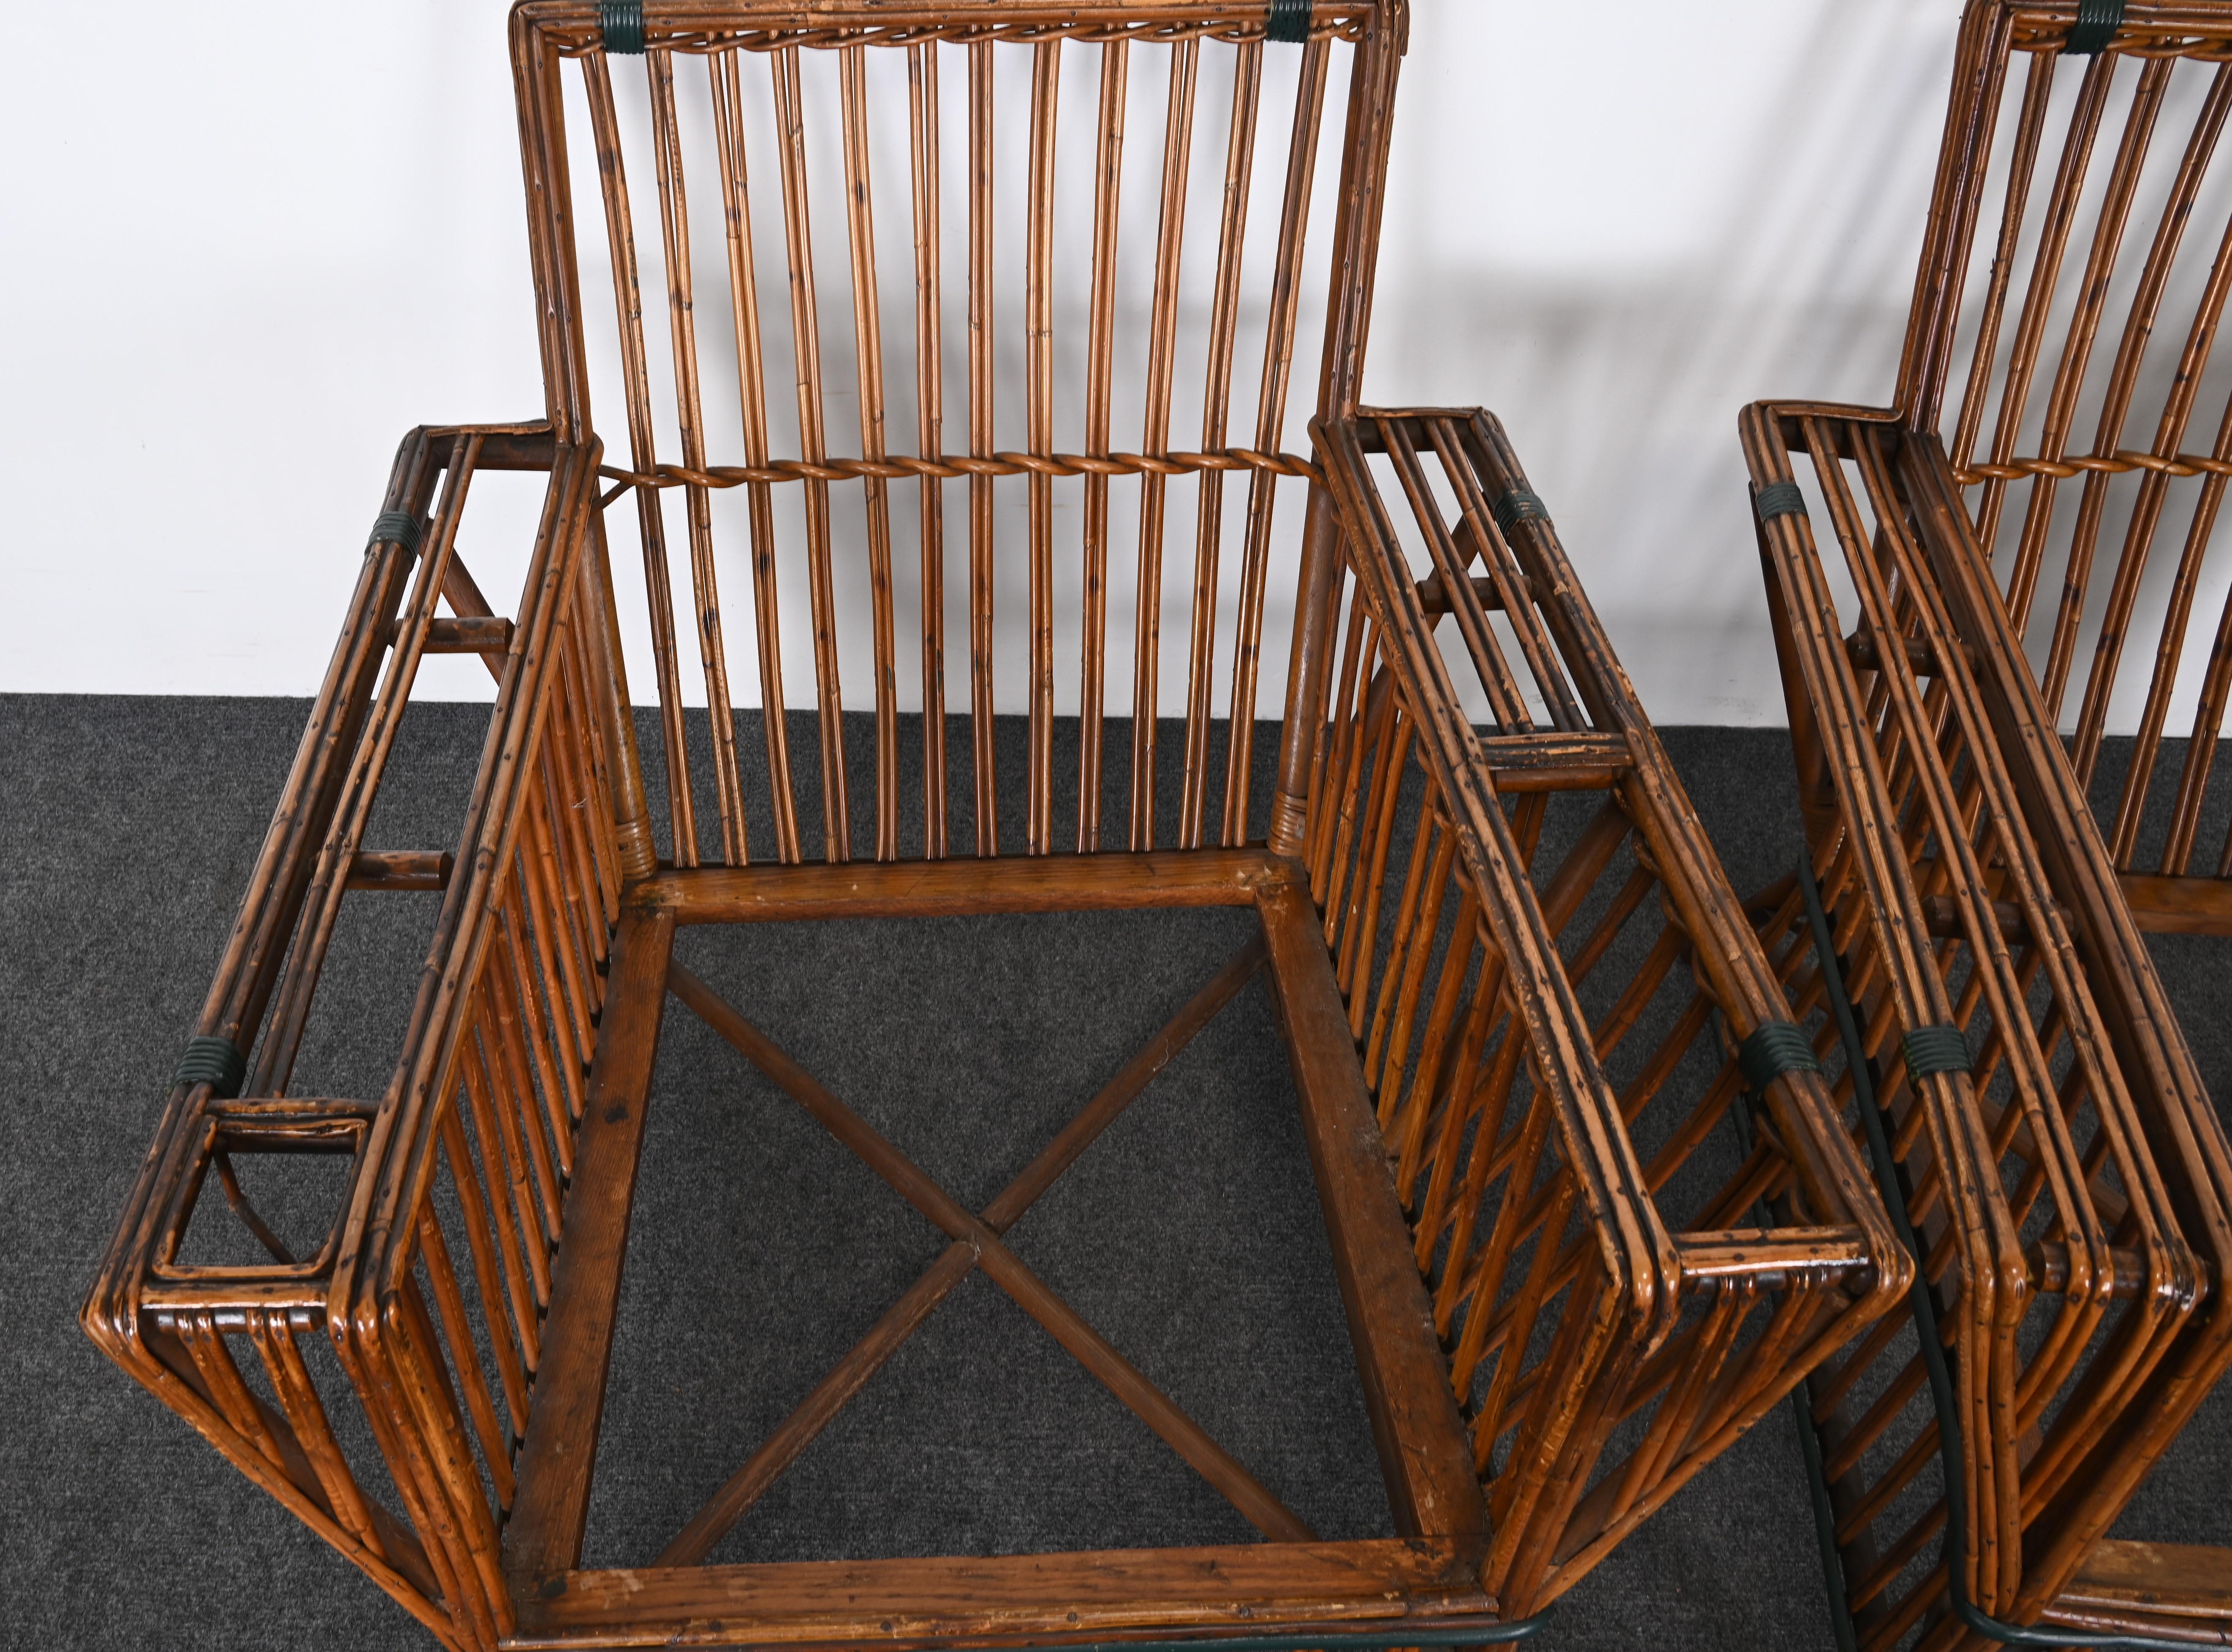 Art Deco Split Ypsilanti Stick Reed Wicker or Sofa with Pair Arm Chairs c. 1930s For Sale 3